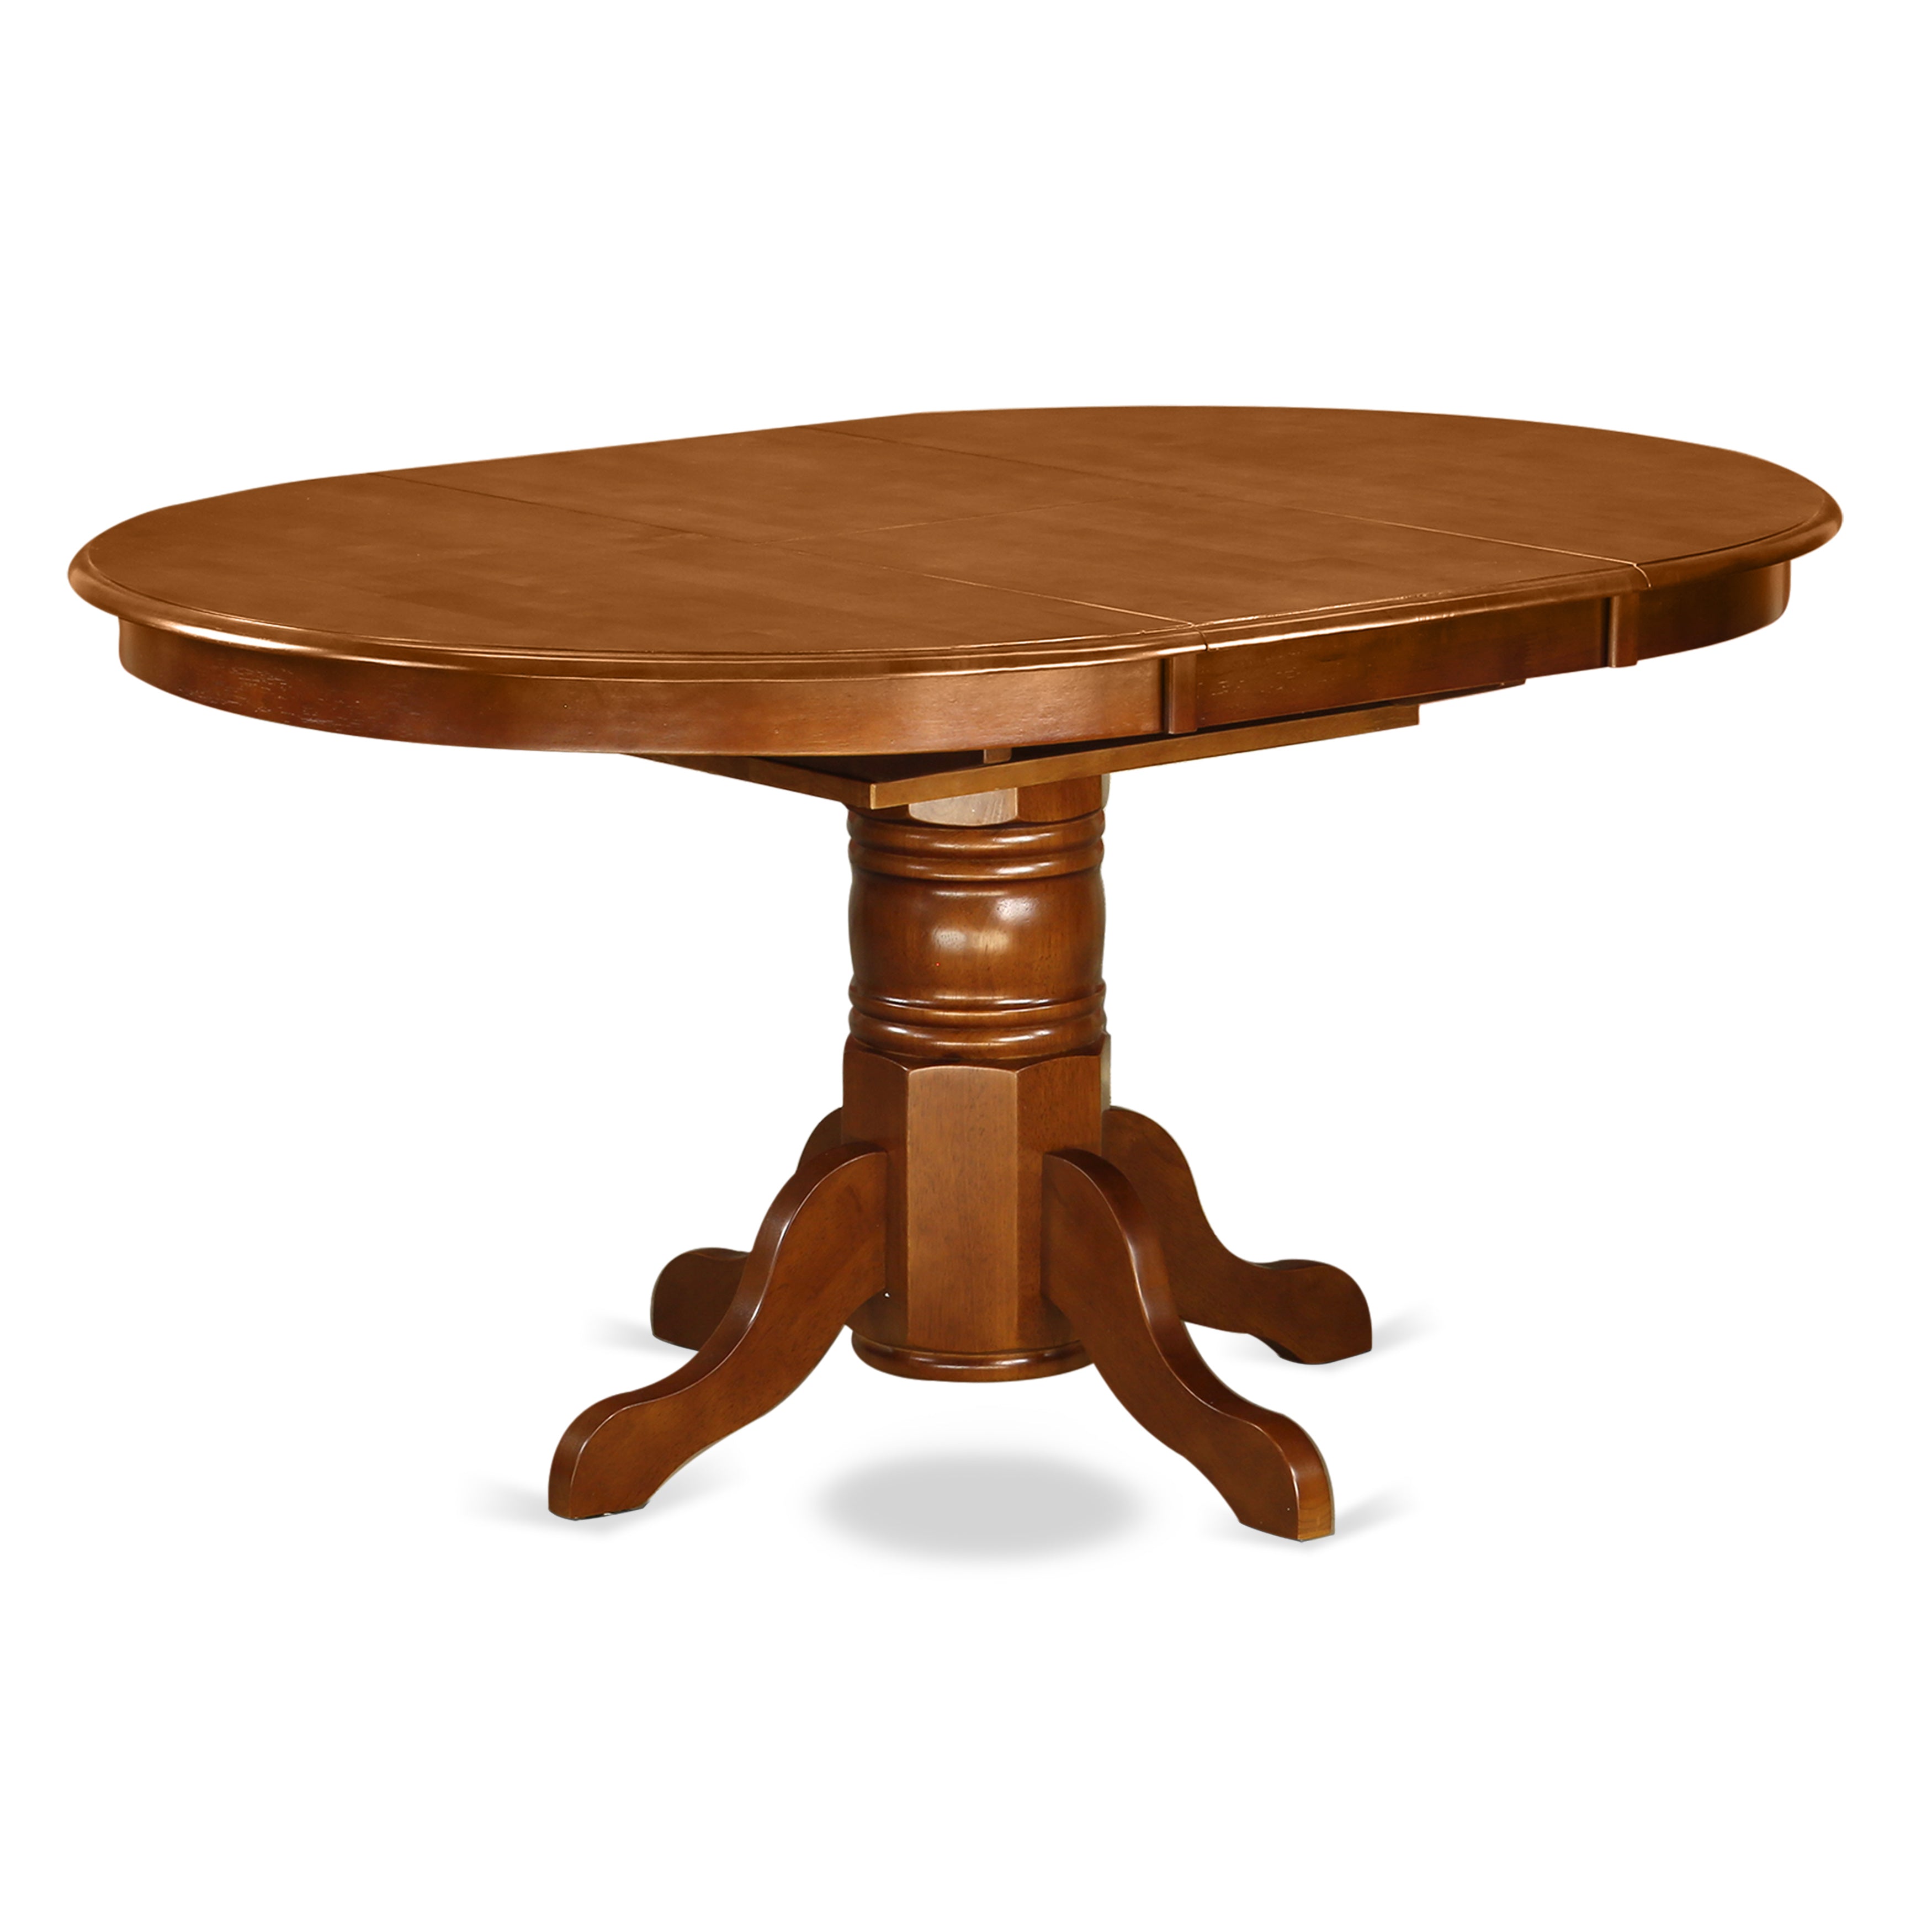 AVPF7-SBR-W 7 Pc set Avon Table with Leaf and 6hard wood Kitchen Chairs in Saddle Brown